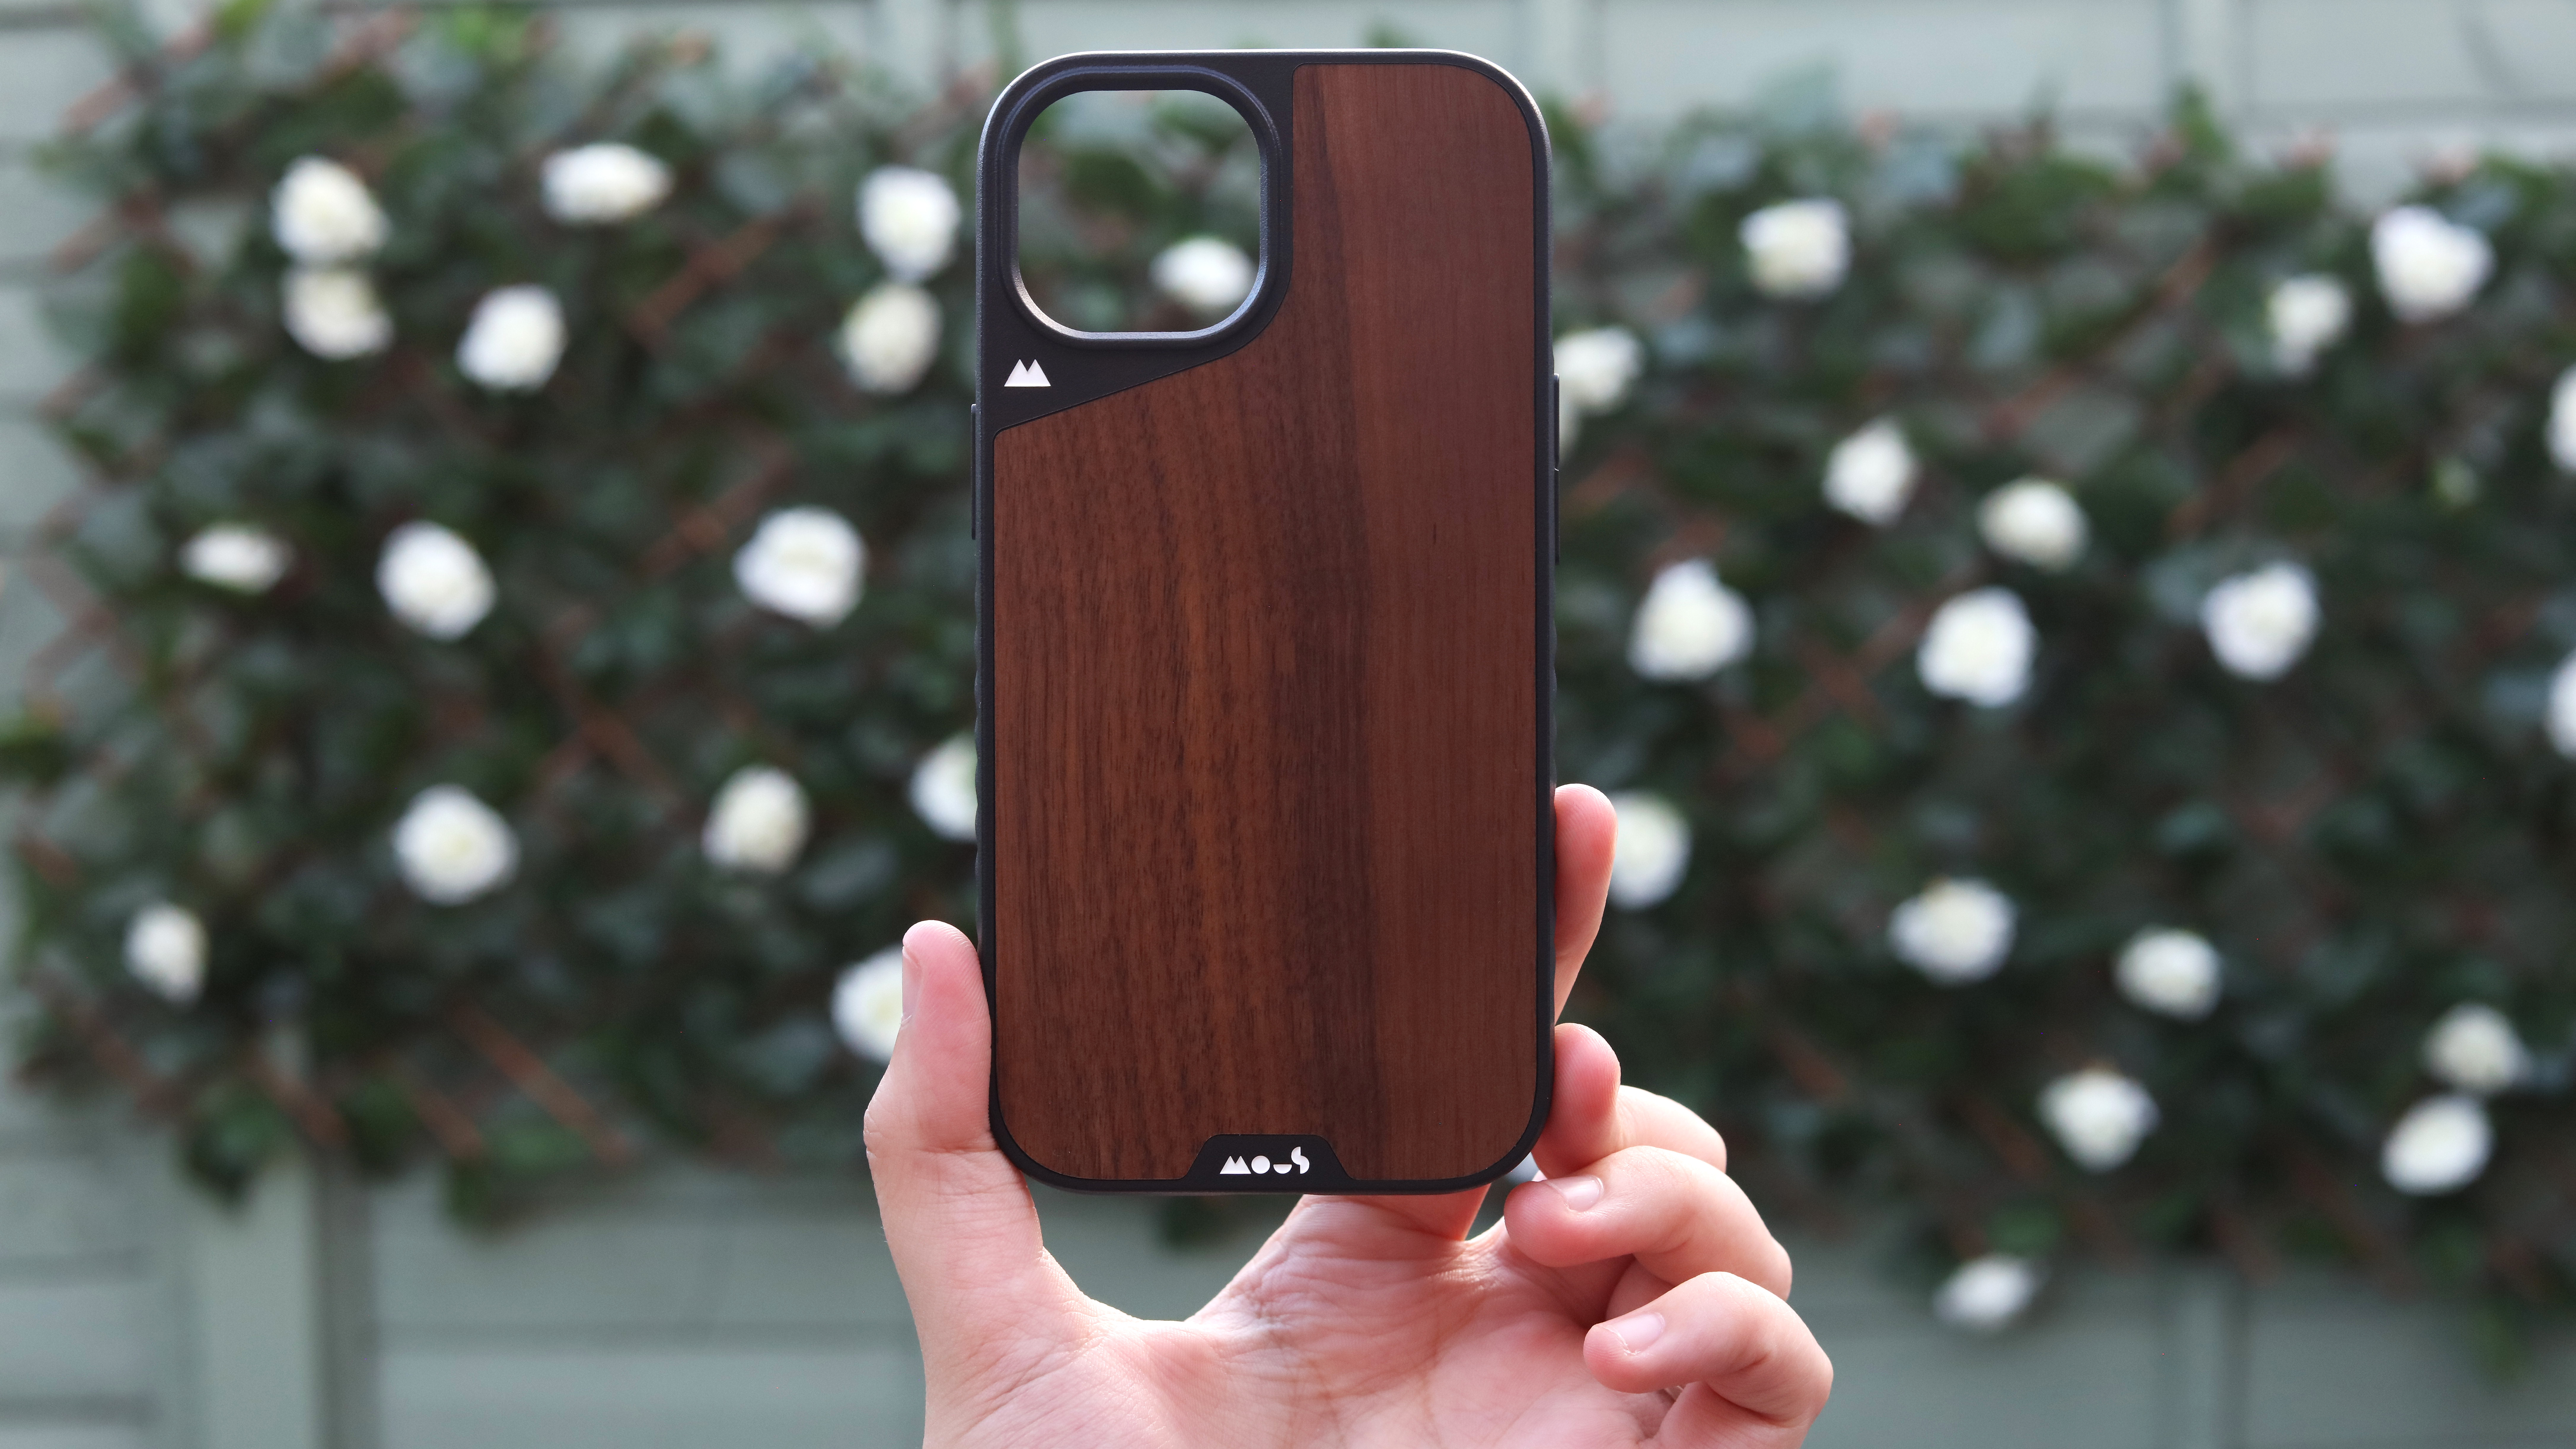 Mous Limitless 3.0 Walnut Case review: High-end style meets rugged